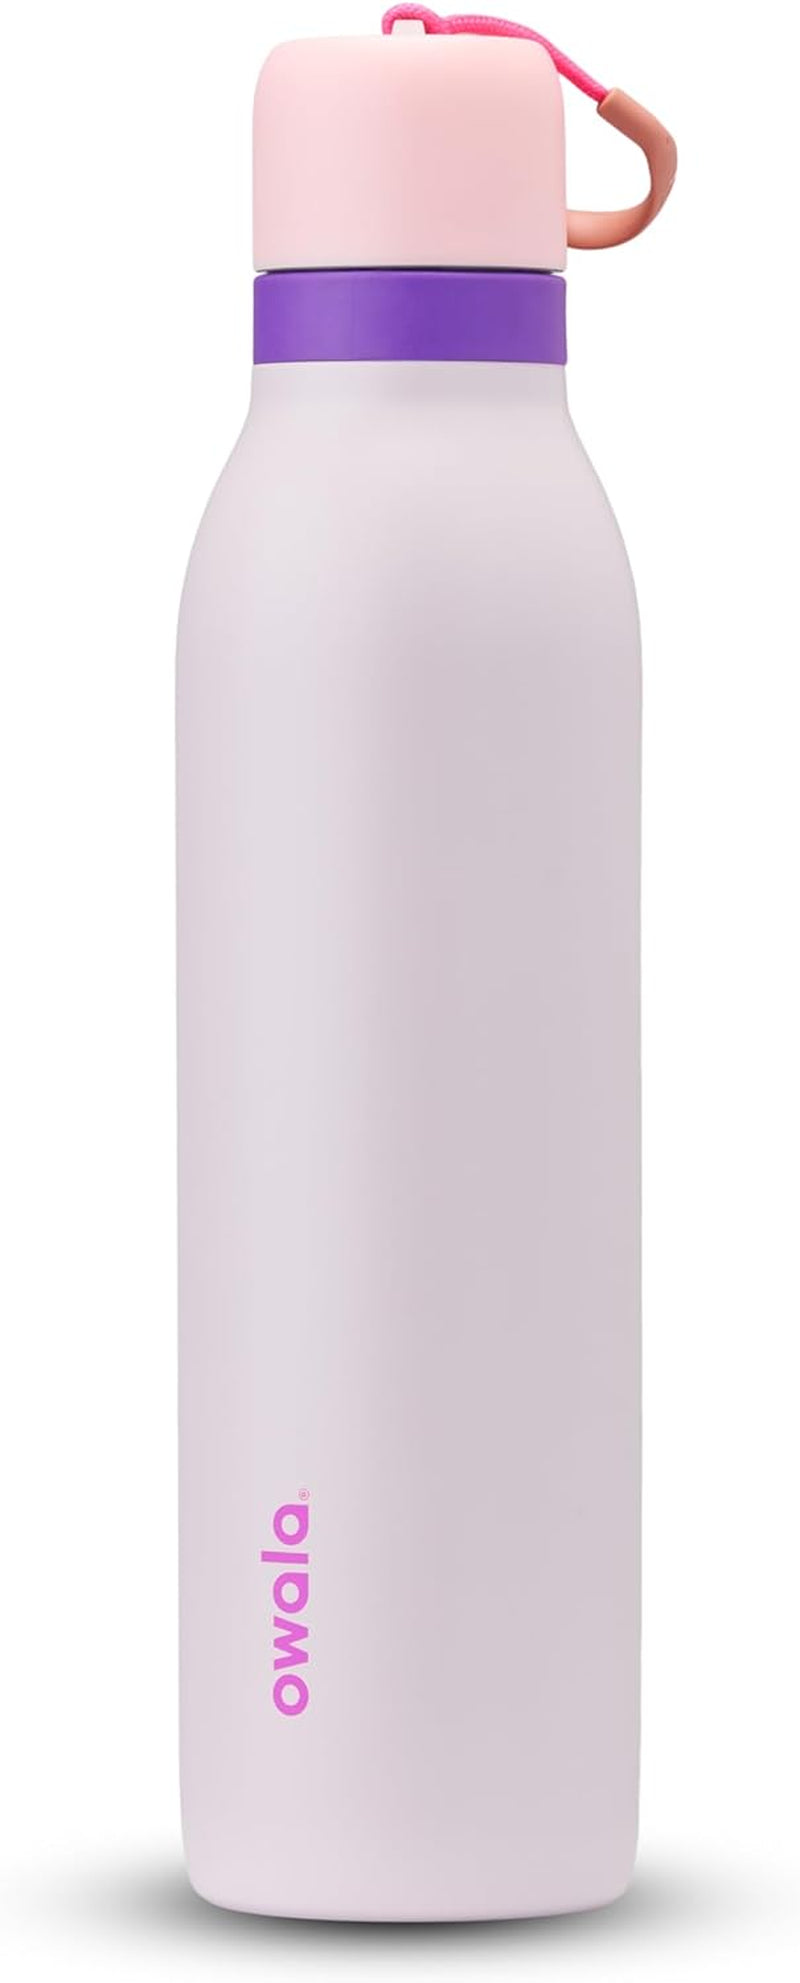 Freesip Twist Insulated Stainless Steel Water Bottle with Straw for Sports and Travel, Bpa-Free, 24-Oz, Pink/Purple (Dreamy Field)